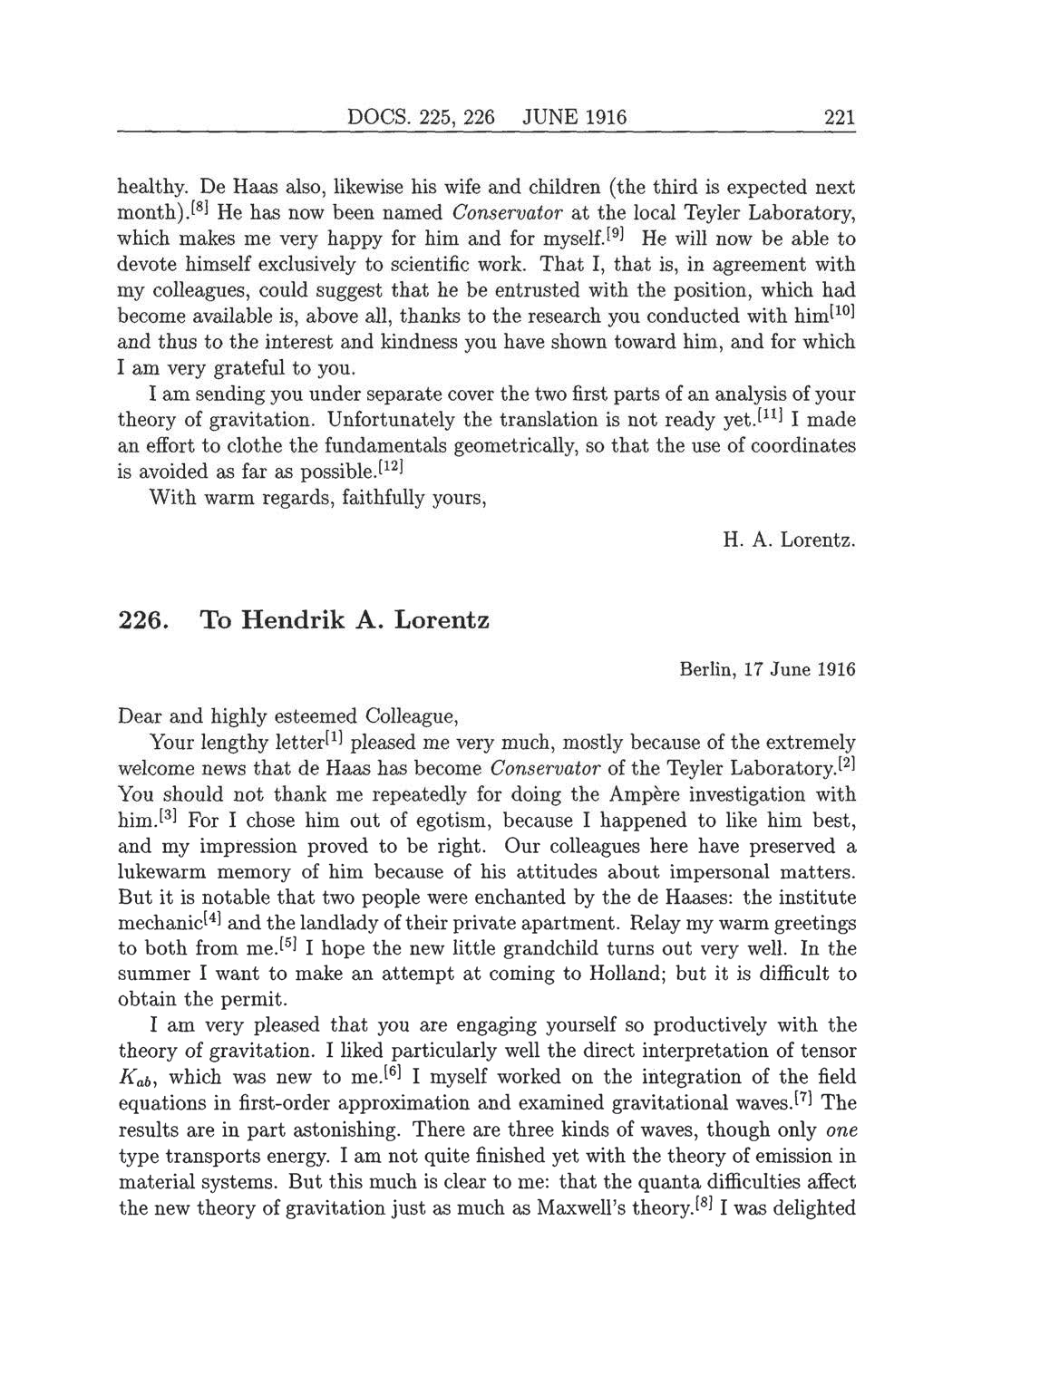 Volume 8: The Berlin Years: Correspondence, 1914-1918 (English translation supplement) page 221